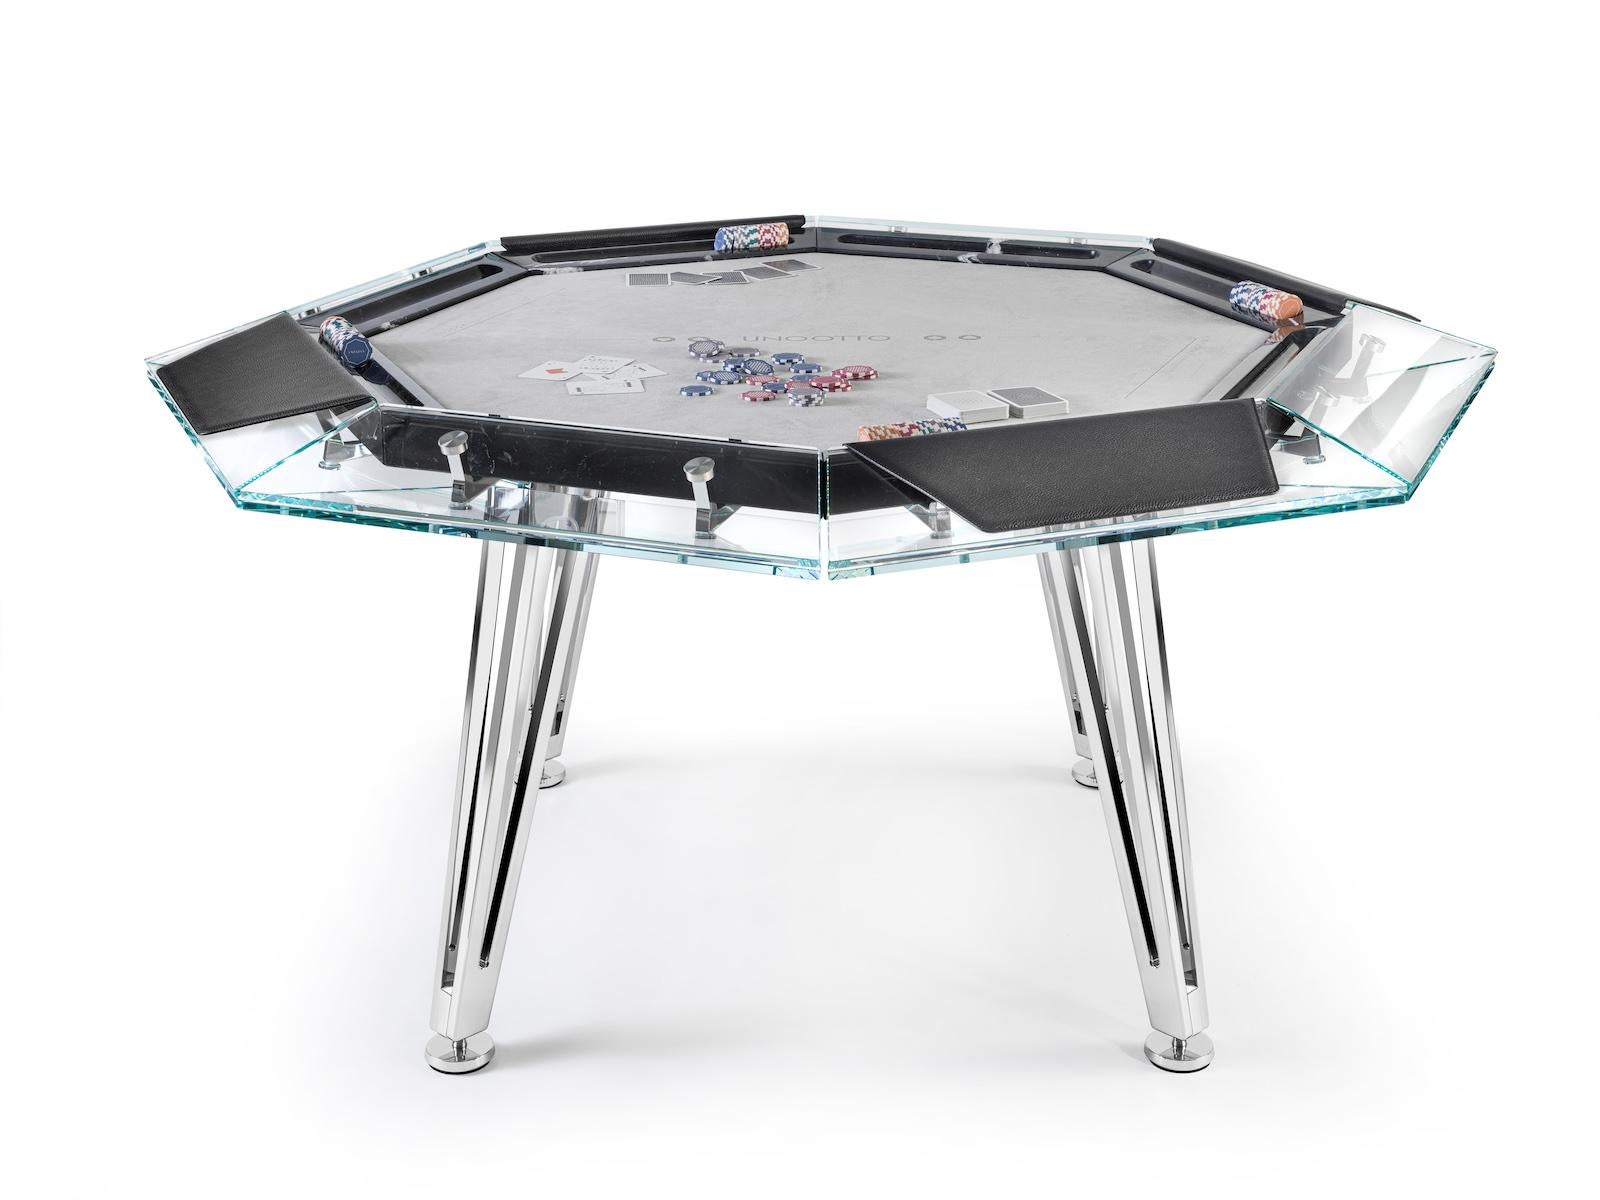 Unootto Marble, 8 Players, Contemporary Design Poker Table by Impatia For Sale 3